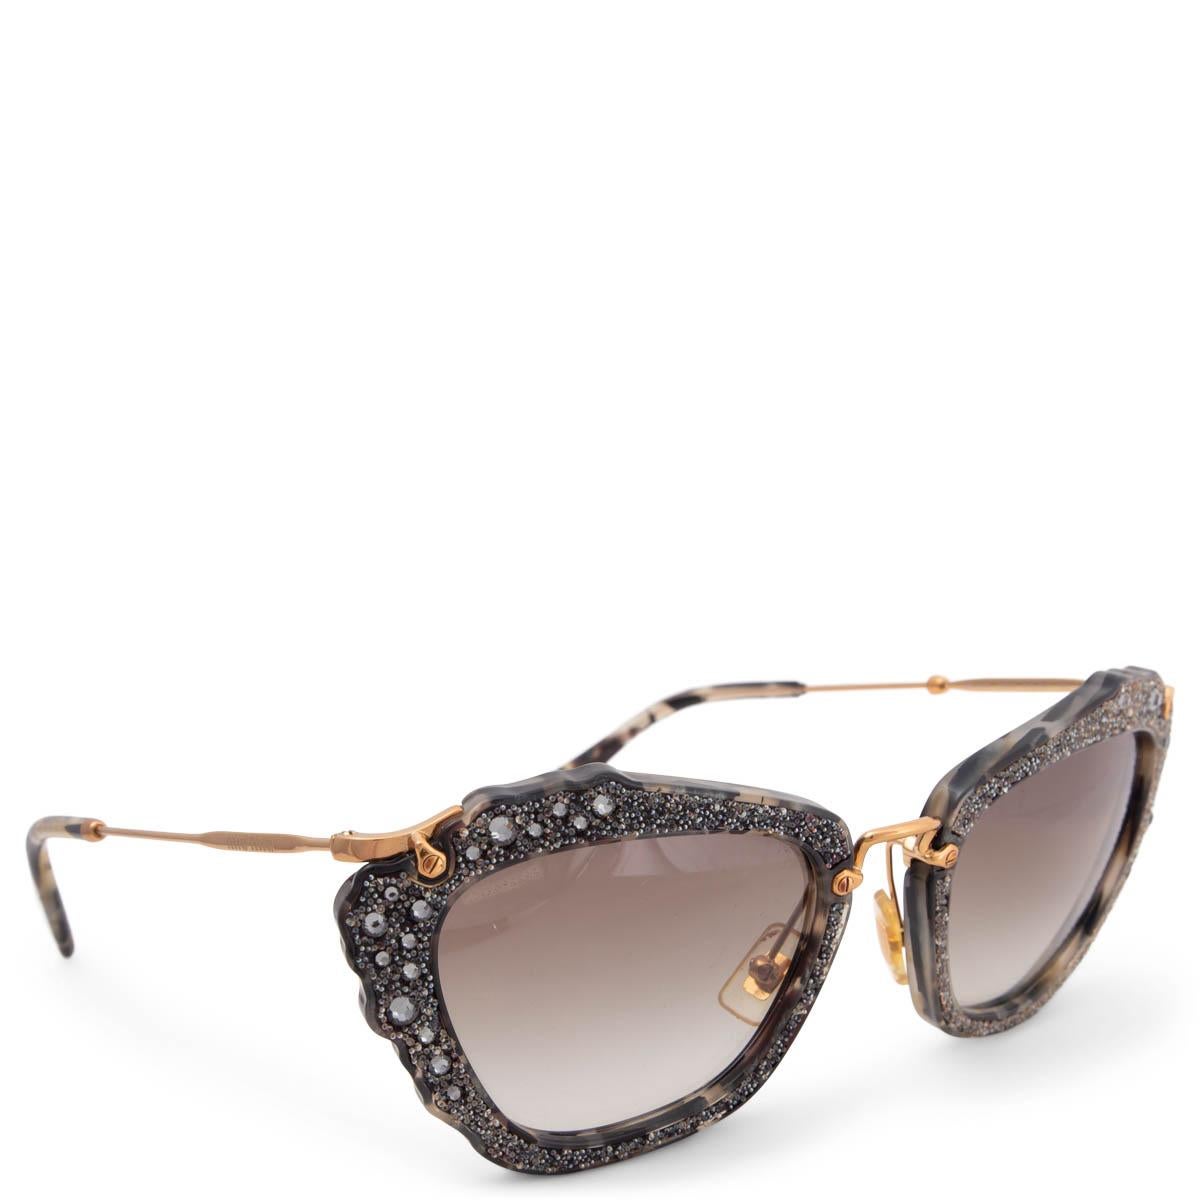 100% authentic Miu Miu SMU04Q cat-eye sunglasses in grey, black and cream tortoise acetate embellished with glitter and rhinestones with grey gradient lenses and gold-tone metal temples. Have been worn and are in excellent condition. Come with case